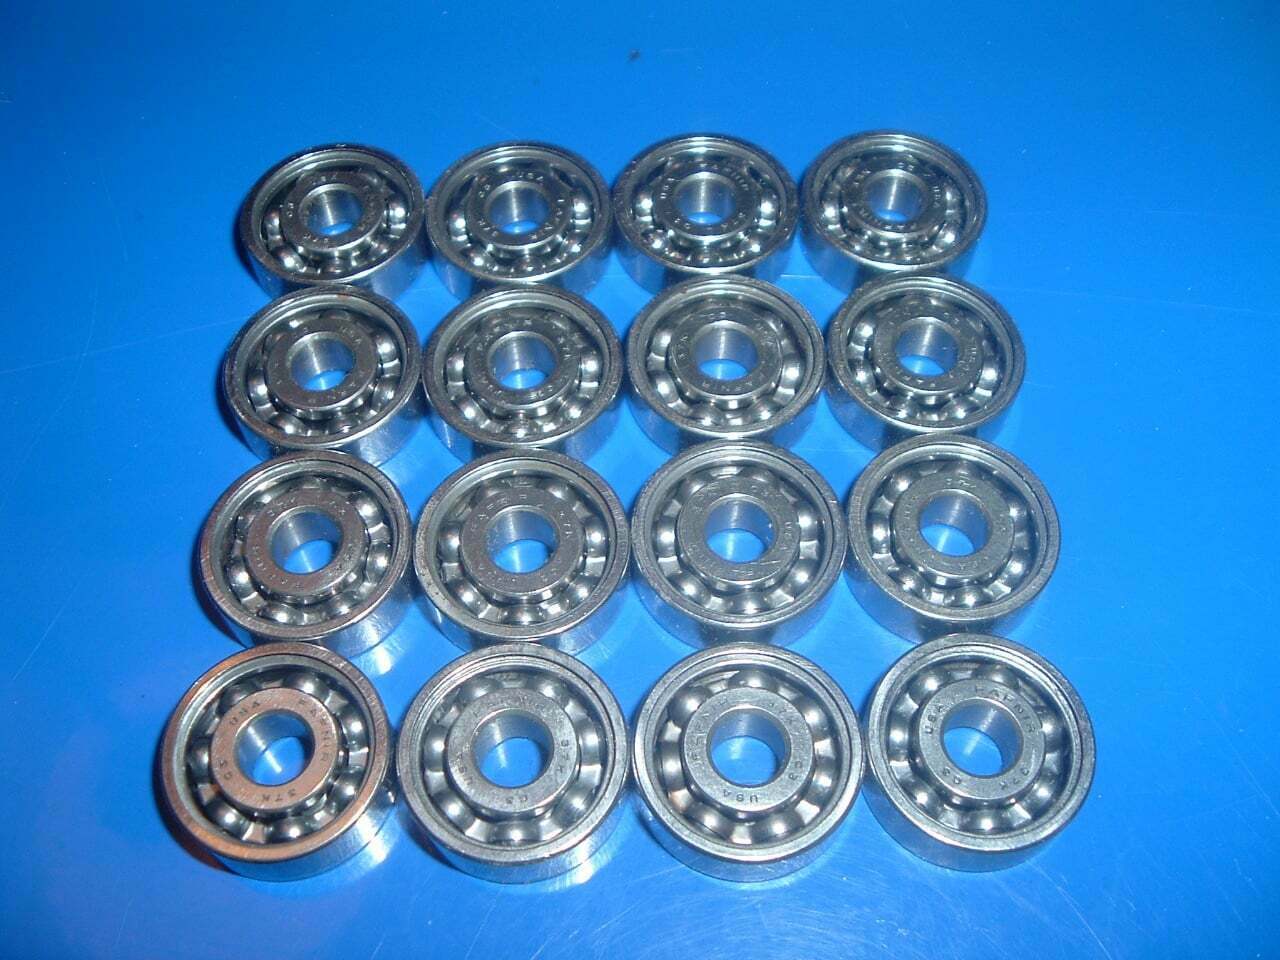 Fafnirs U.s.a C3 37k No Shields 7mm Matched 7 Ball Steel Caged Bearings. In Ama